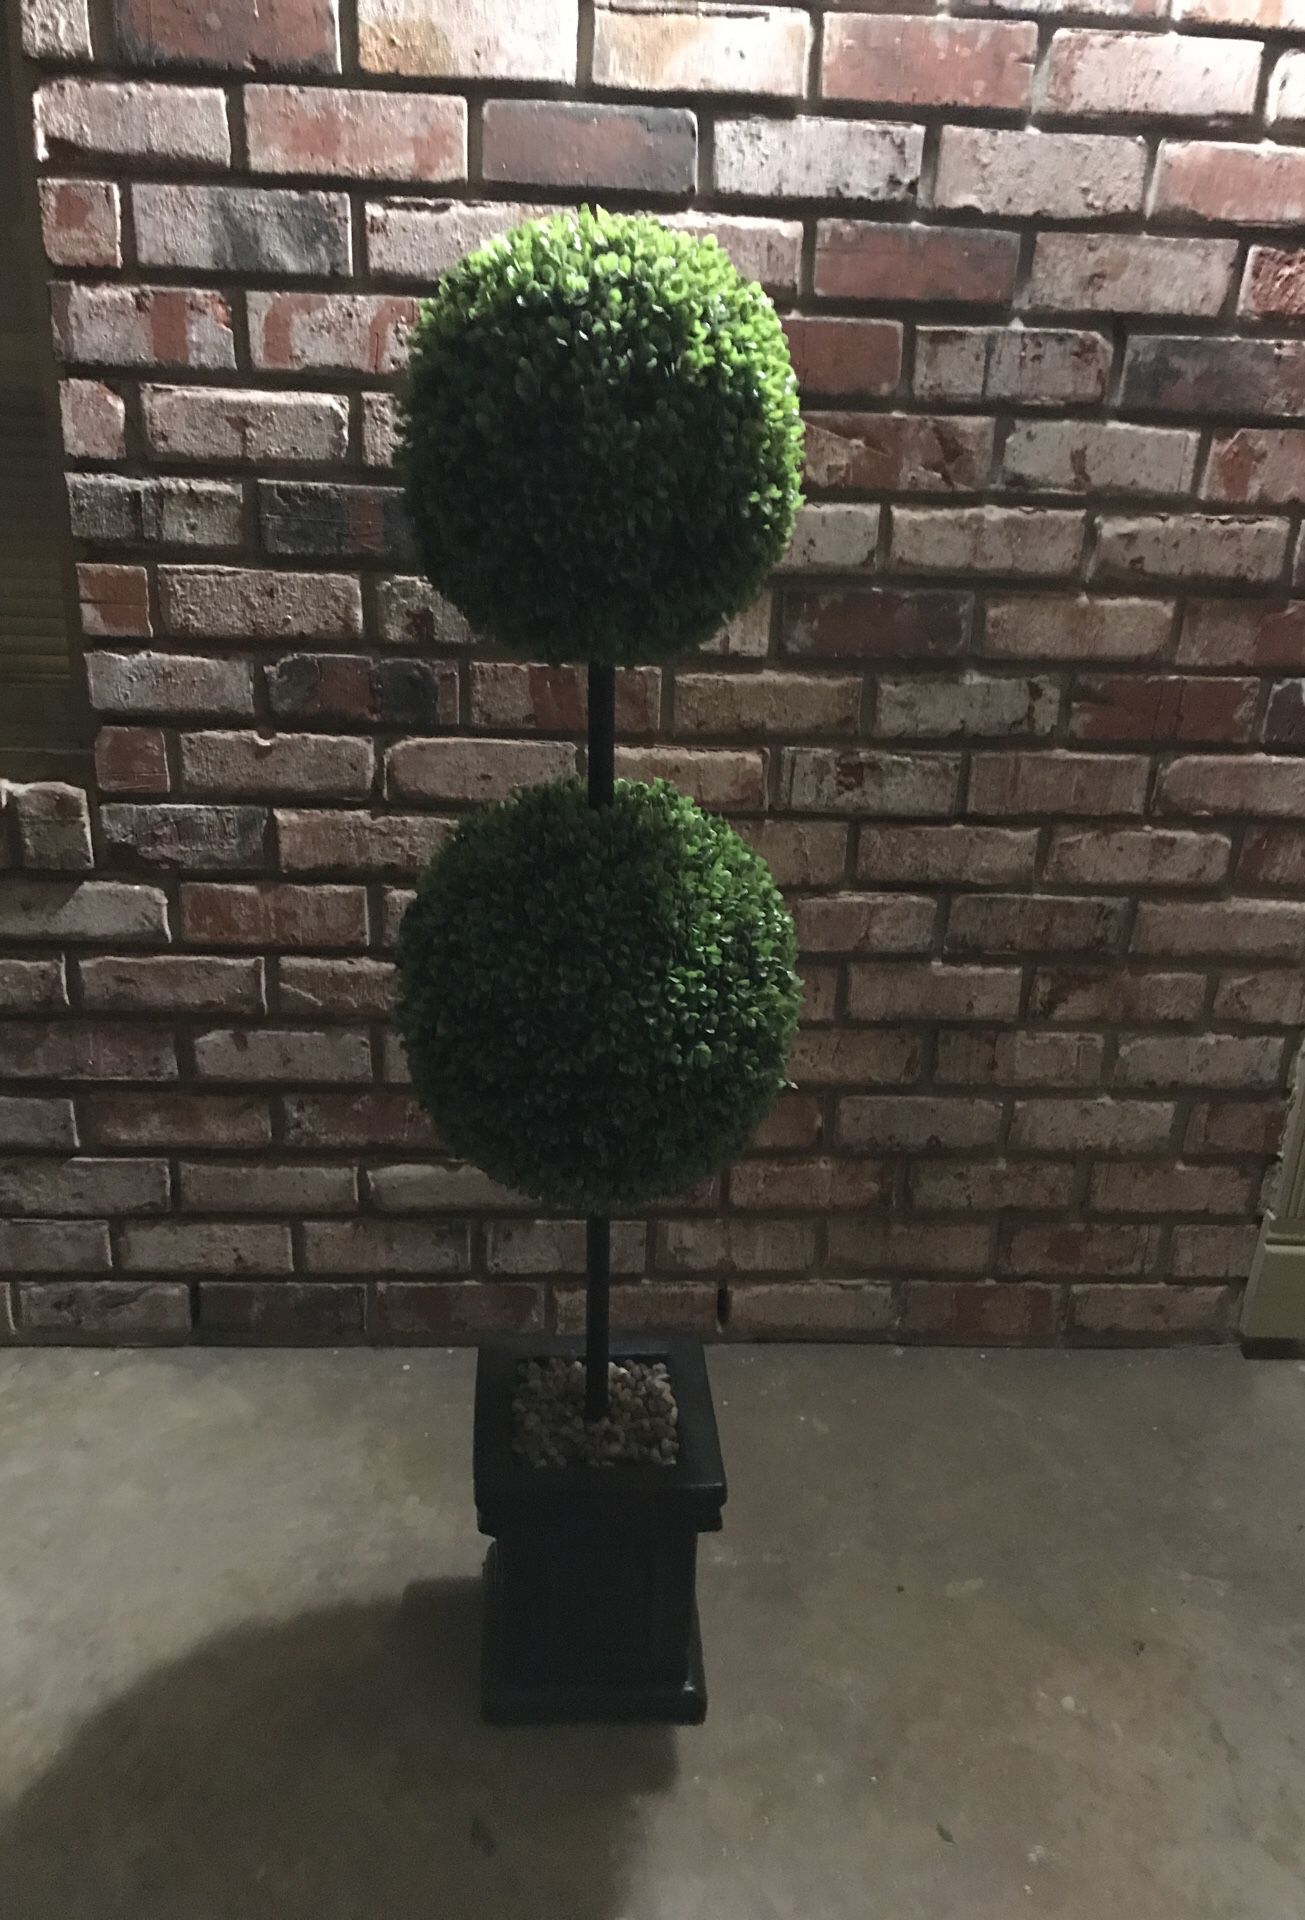 ITS 2 TOPIARY TREES